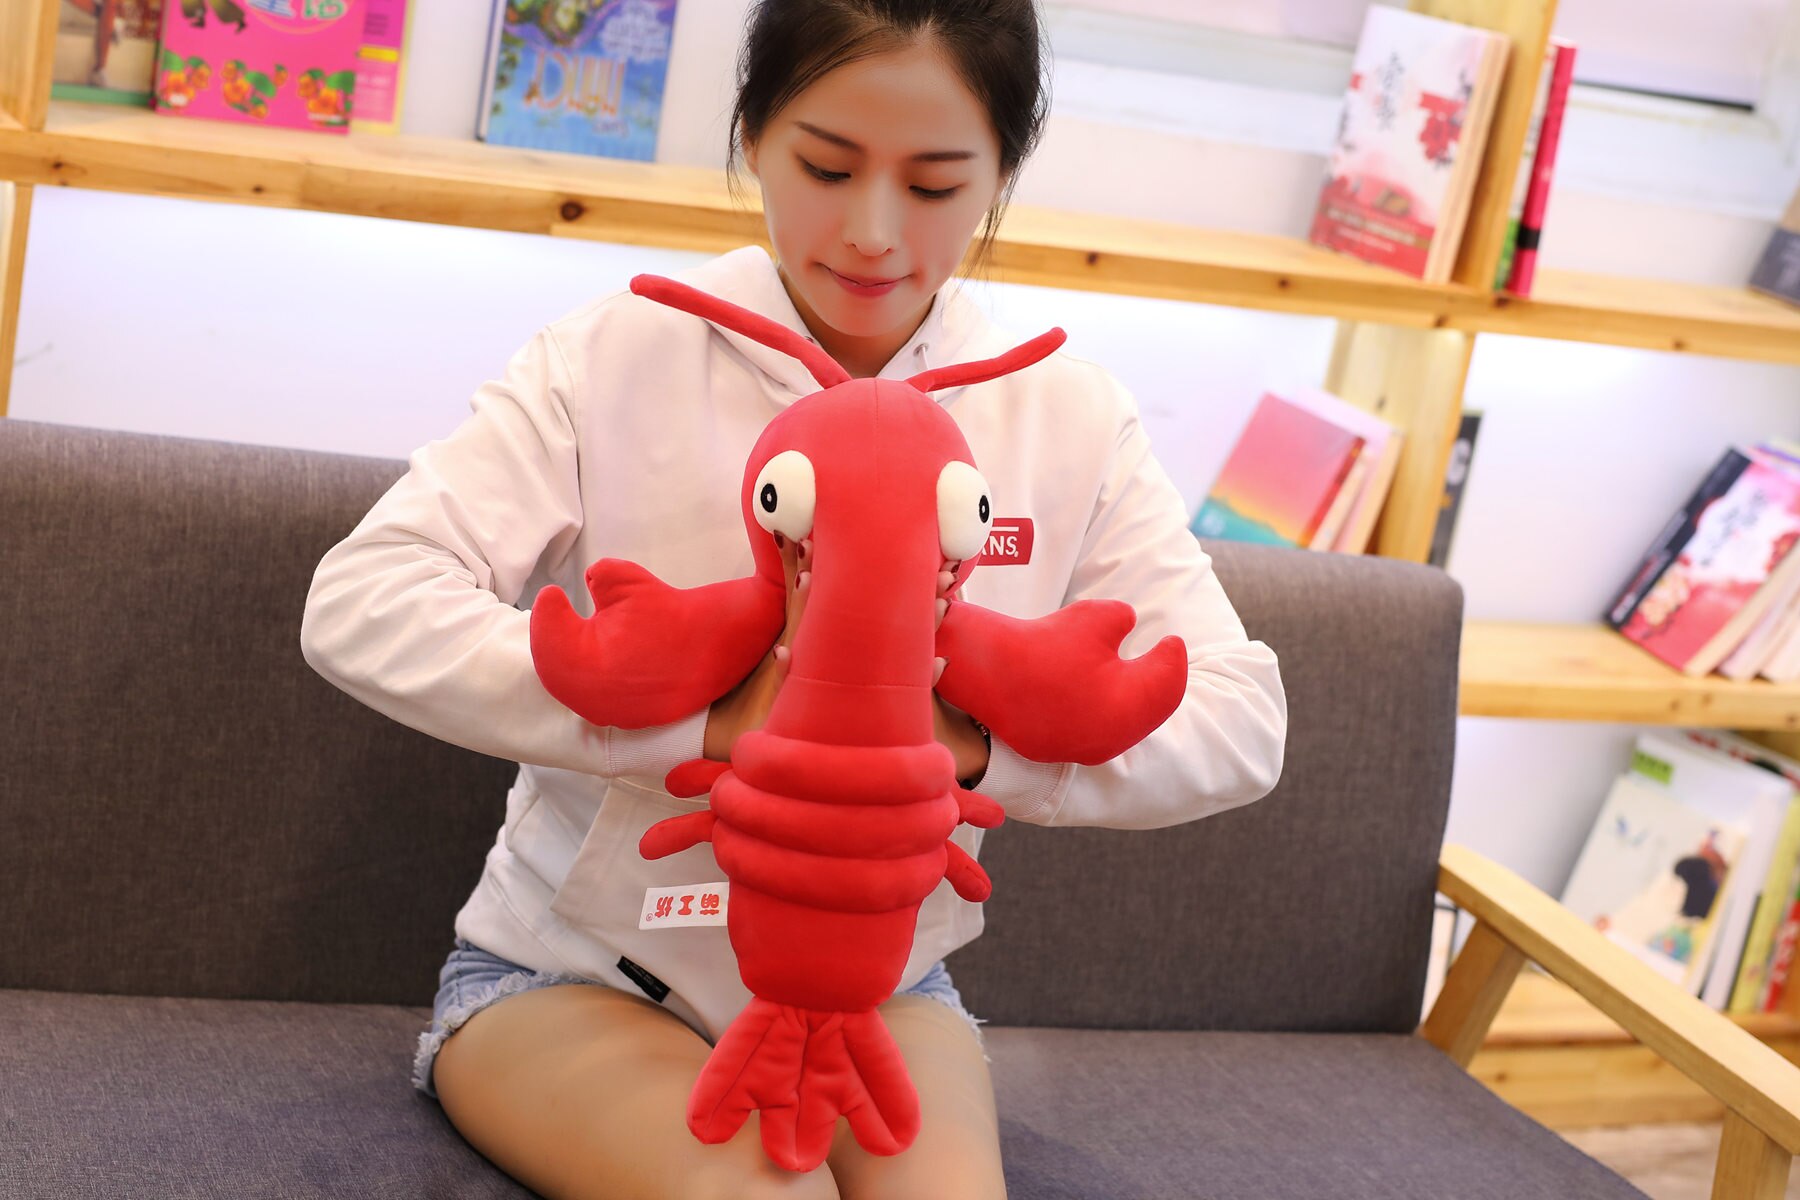 New Arrival Big Lobster Plush Toy for Baby Kids Playmate Soft Stuffed Animal Lobster Plush Toy Gifts for Kids Birthday